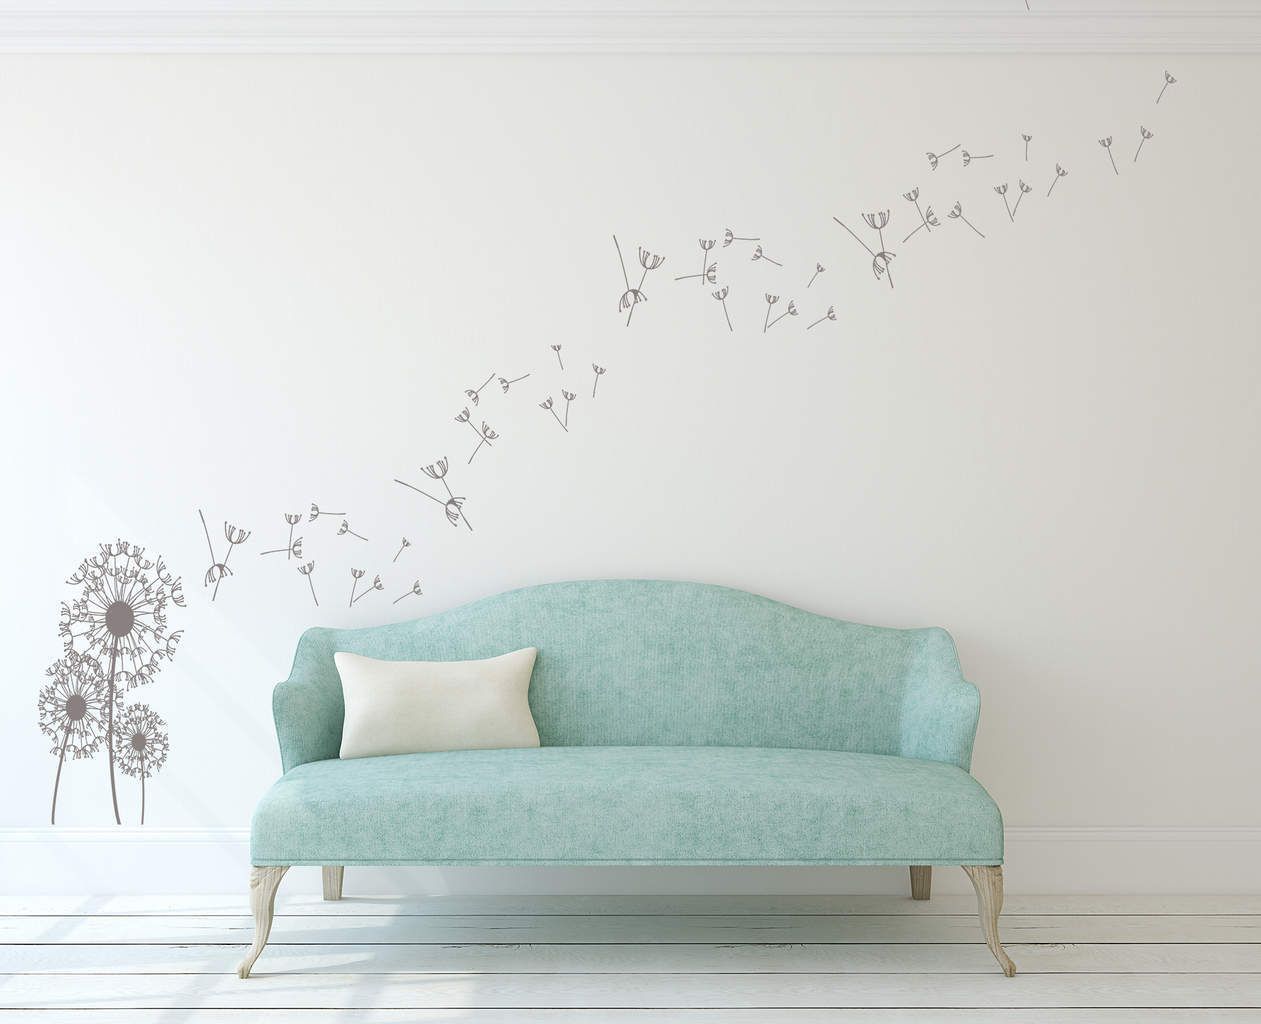 Dandelion Wall Art Decal | Dandelion Wall Decal Sticker For Best And Newest Flying Dandelion Wall Art (View 14 of 20)